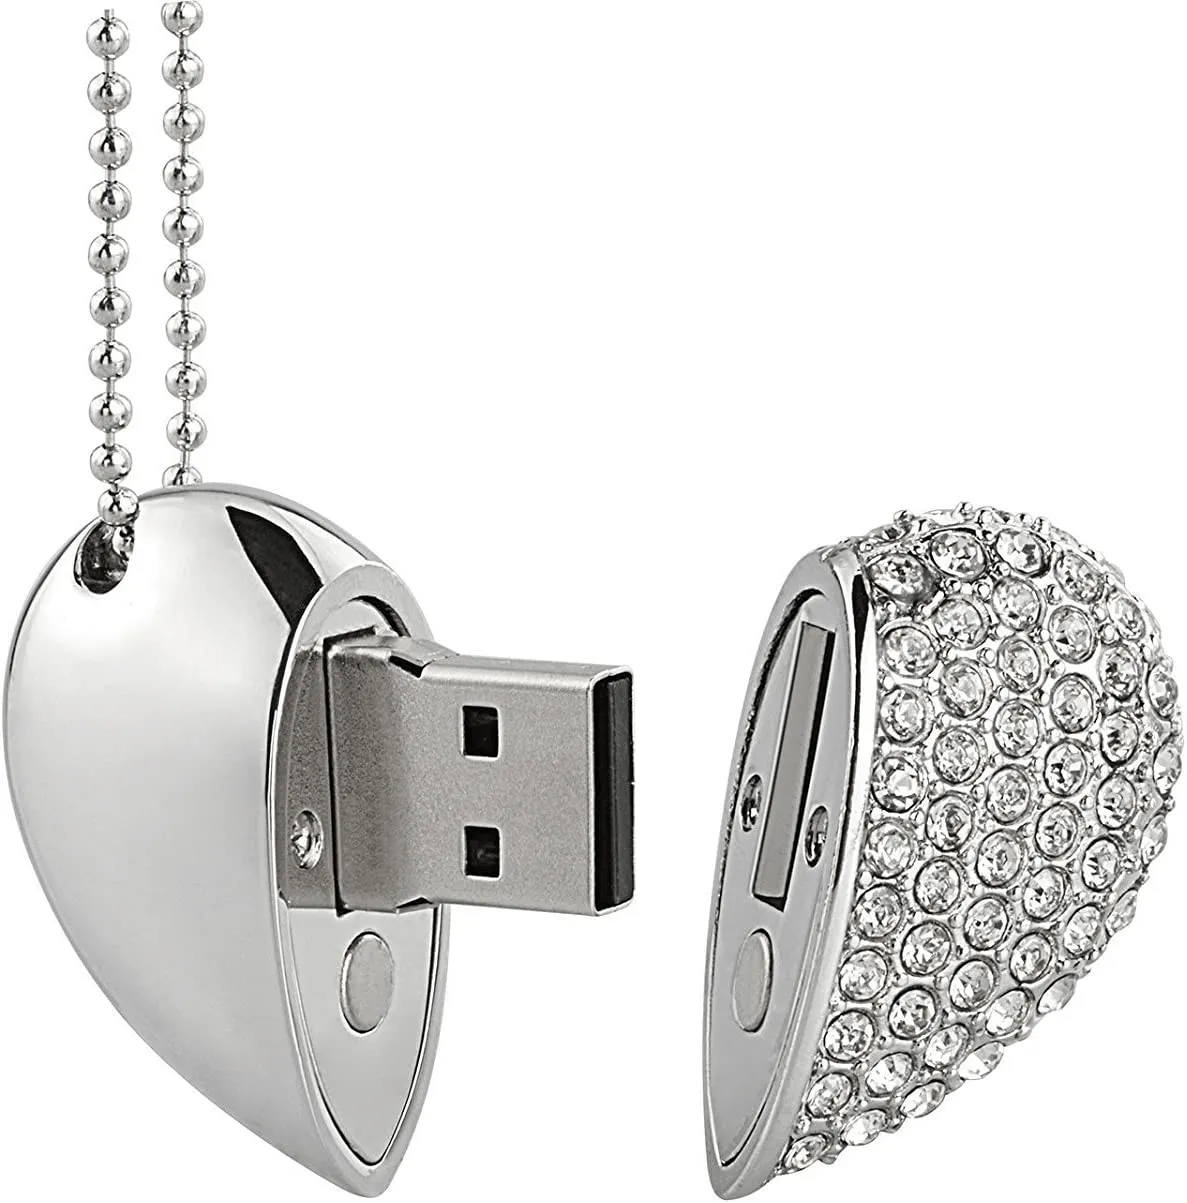 Crystal Loving Heart Shape USB Flash Drive Memory Stick with Necklace